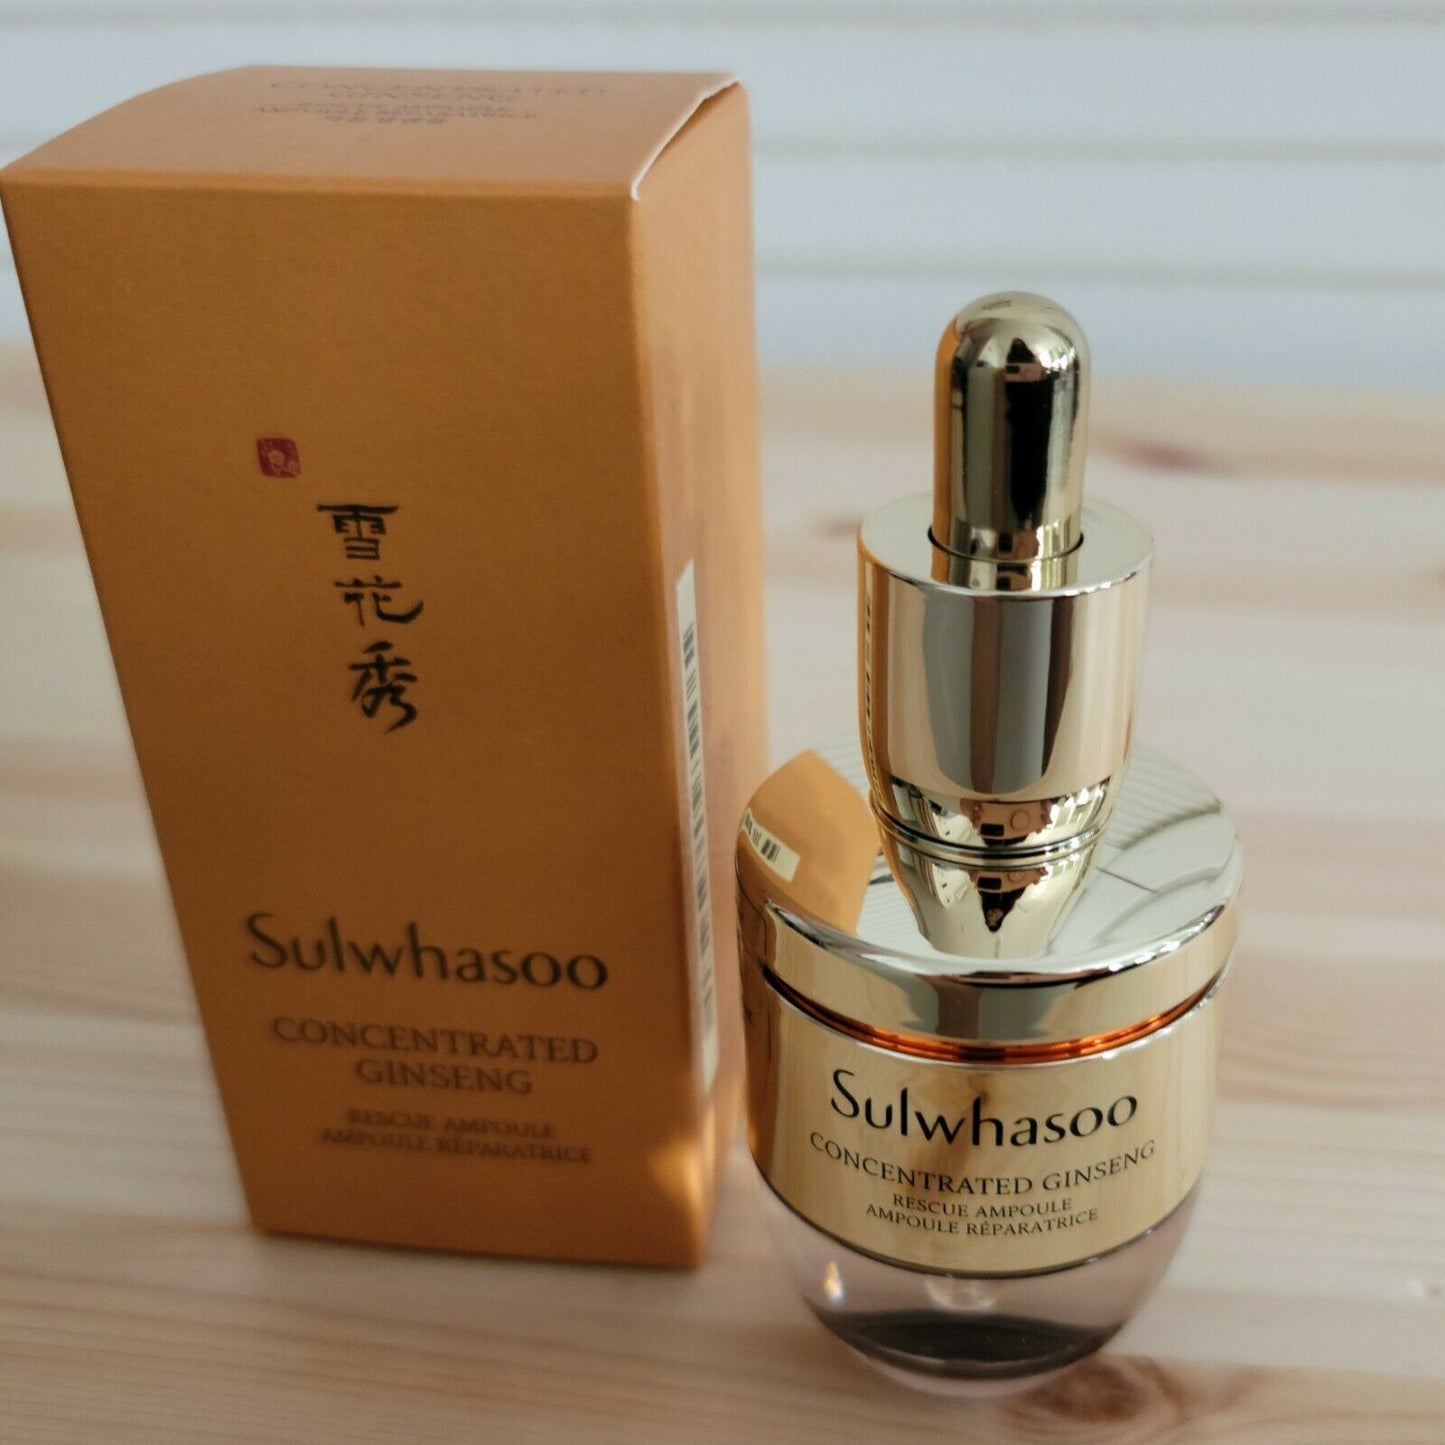 Sulwhasoo Concentrated Ginseng Rescue Ampoule 20g+OHUI/O HUI 5 Items Kit/Set